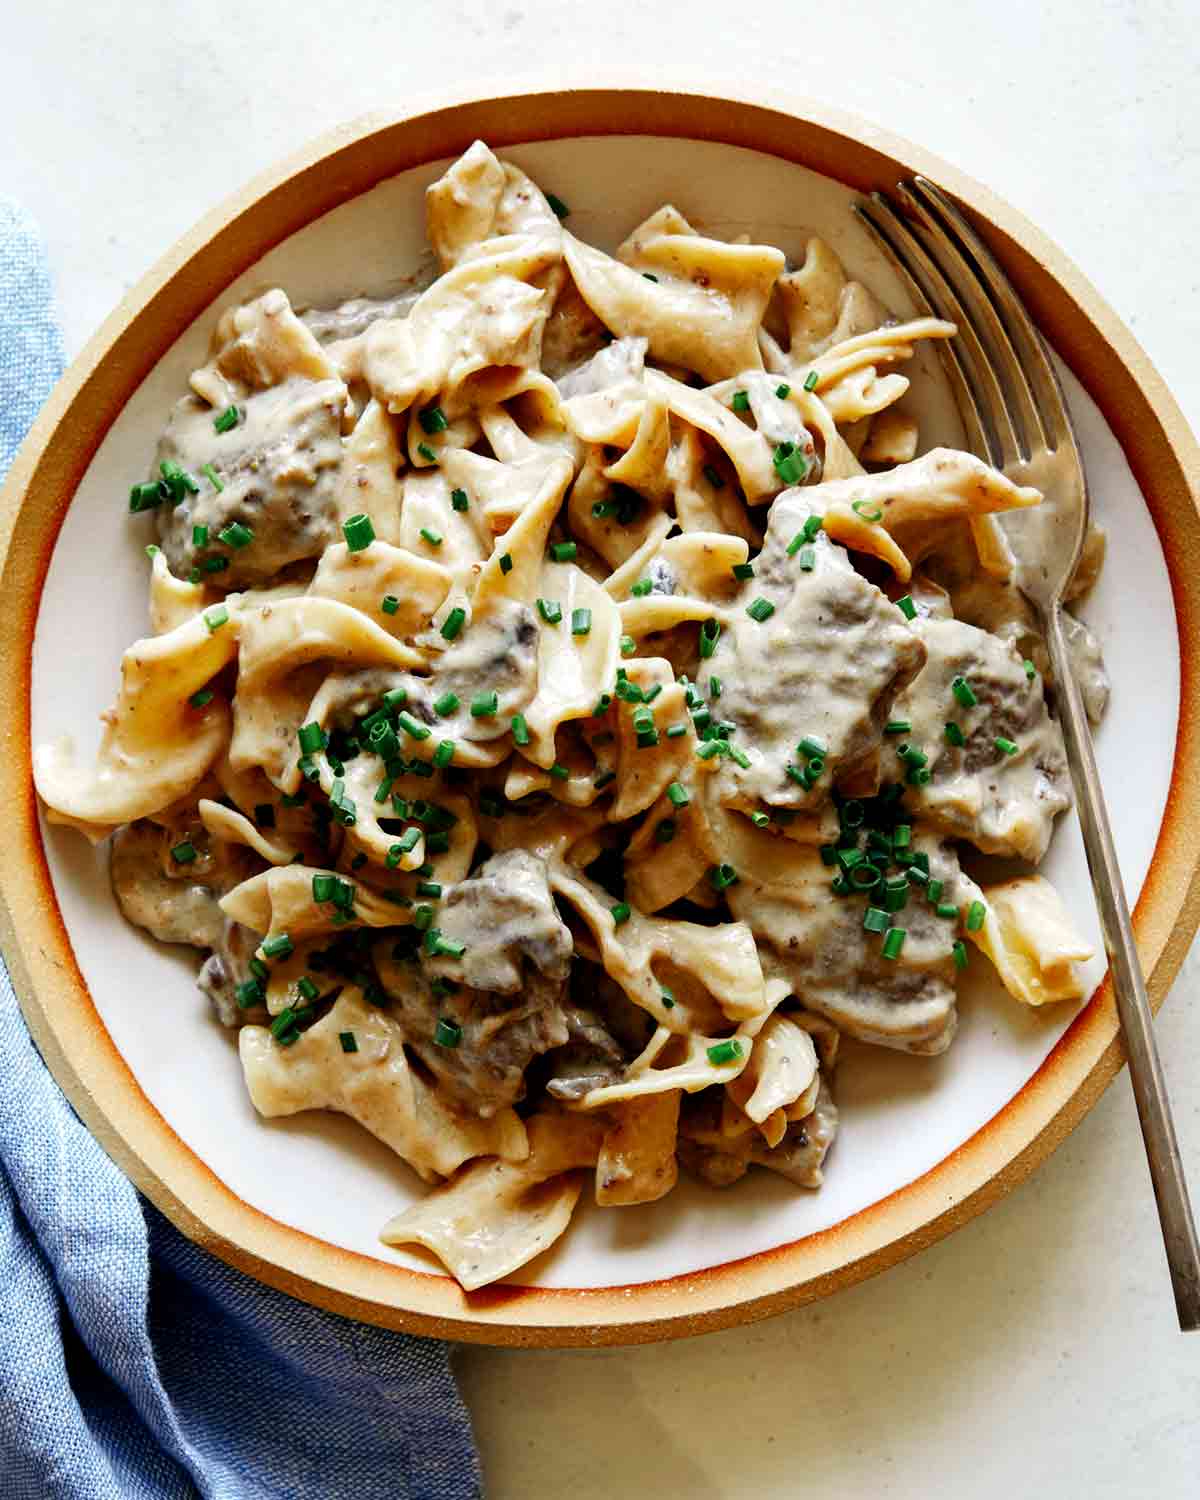 Beef Stroganoff recipe in a bowl with chives on top.